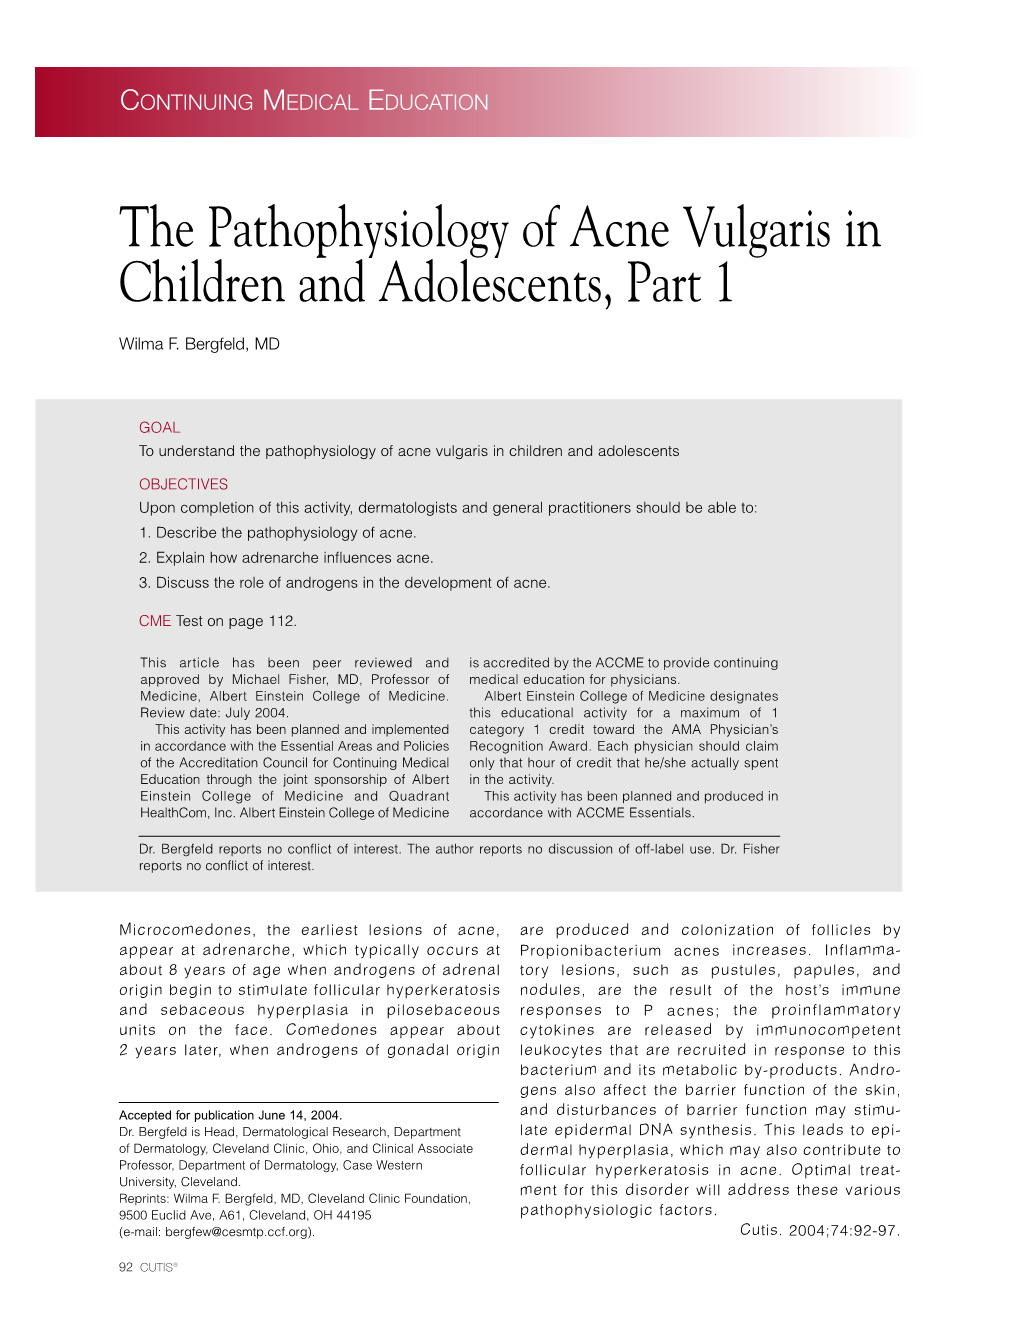 The Pathophysiology of Acne Vulgaris in Children and Adolescents, Part 1